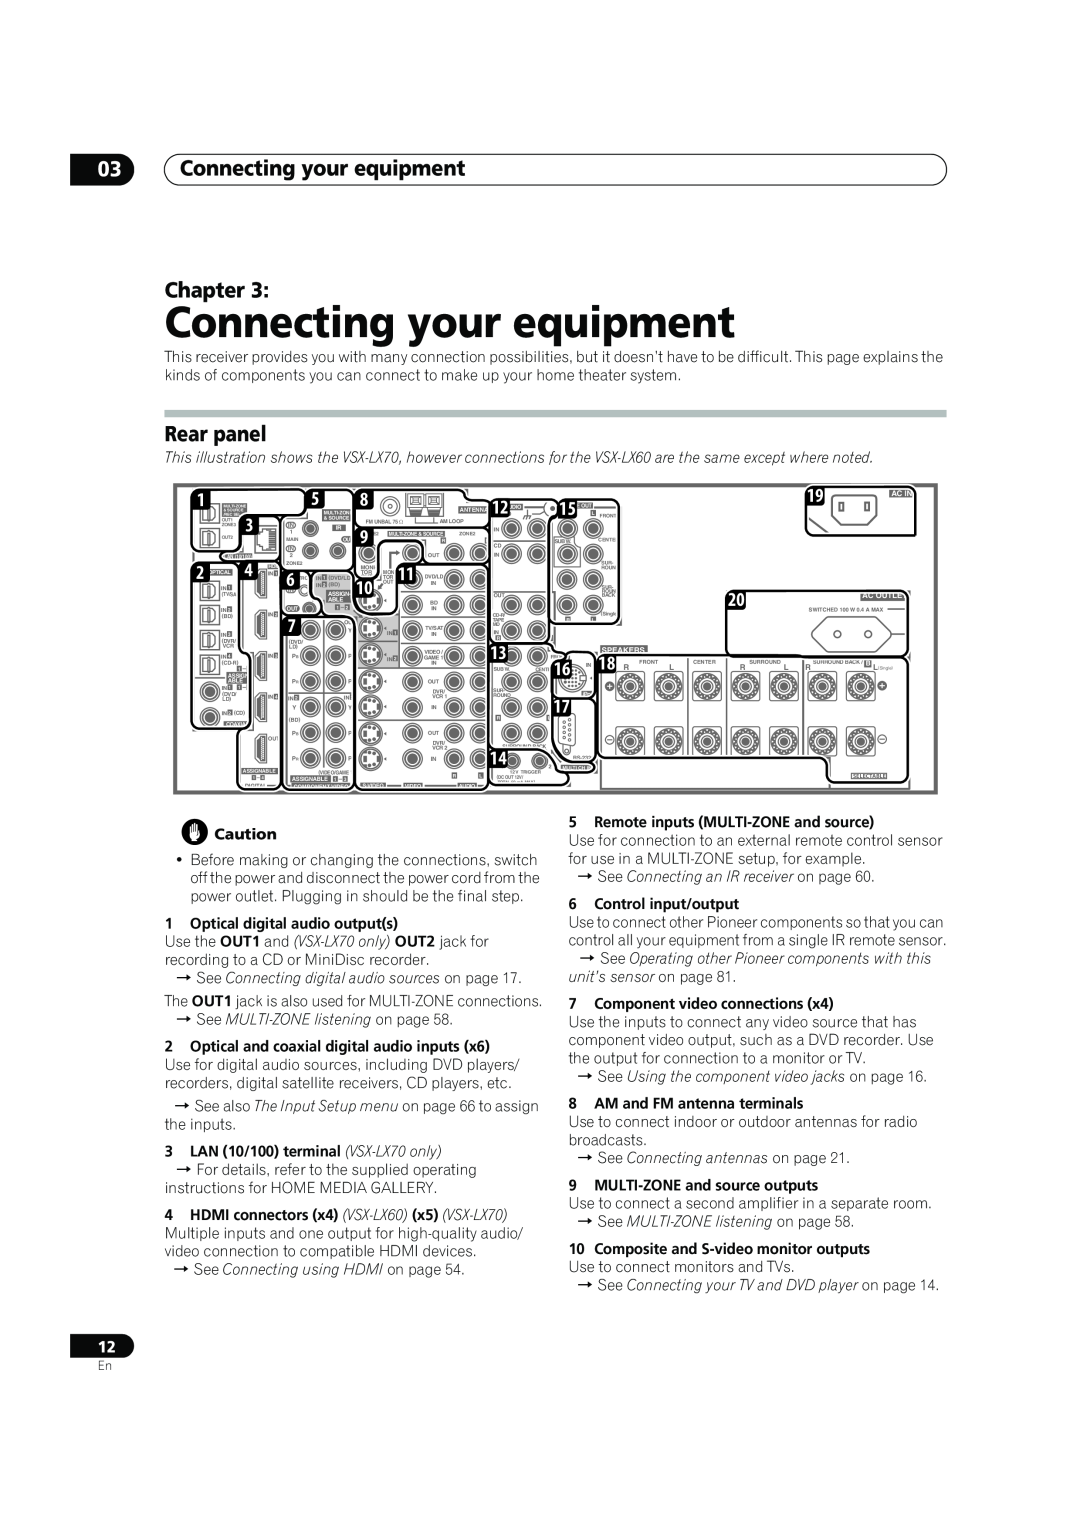 Pioneer VSX-LX60 operating instructions 03Connecting your equipment Chapter, Rear panel 